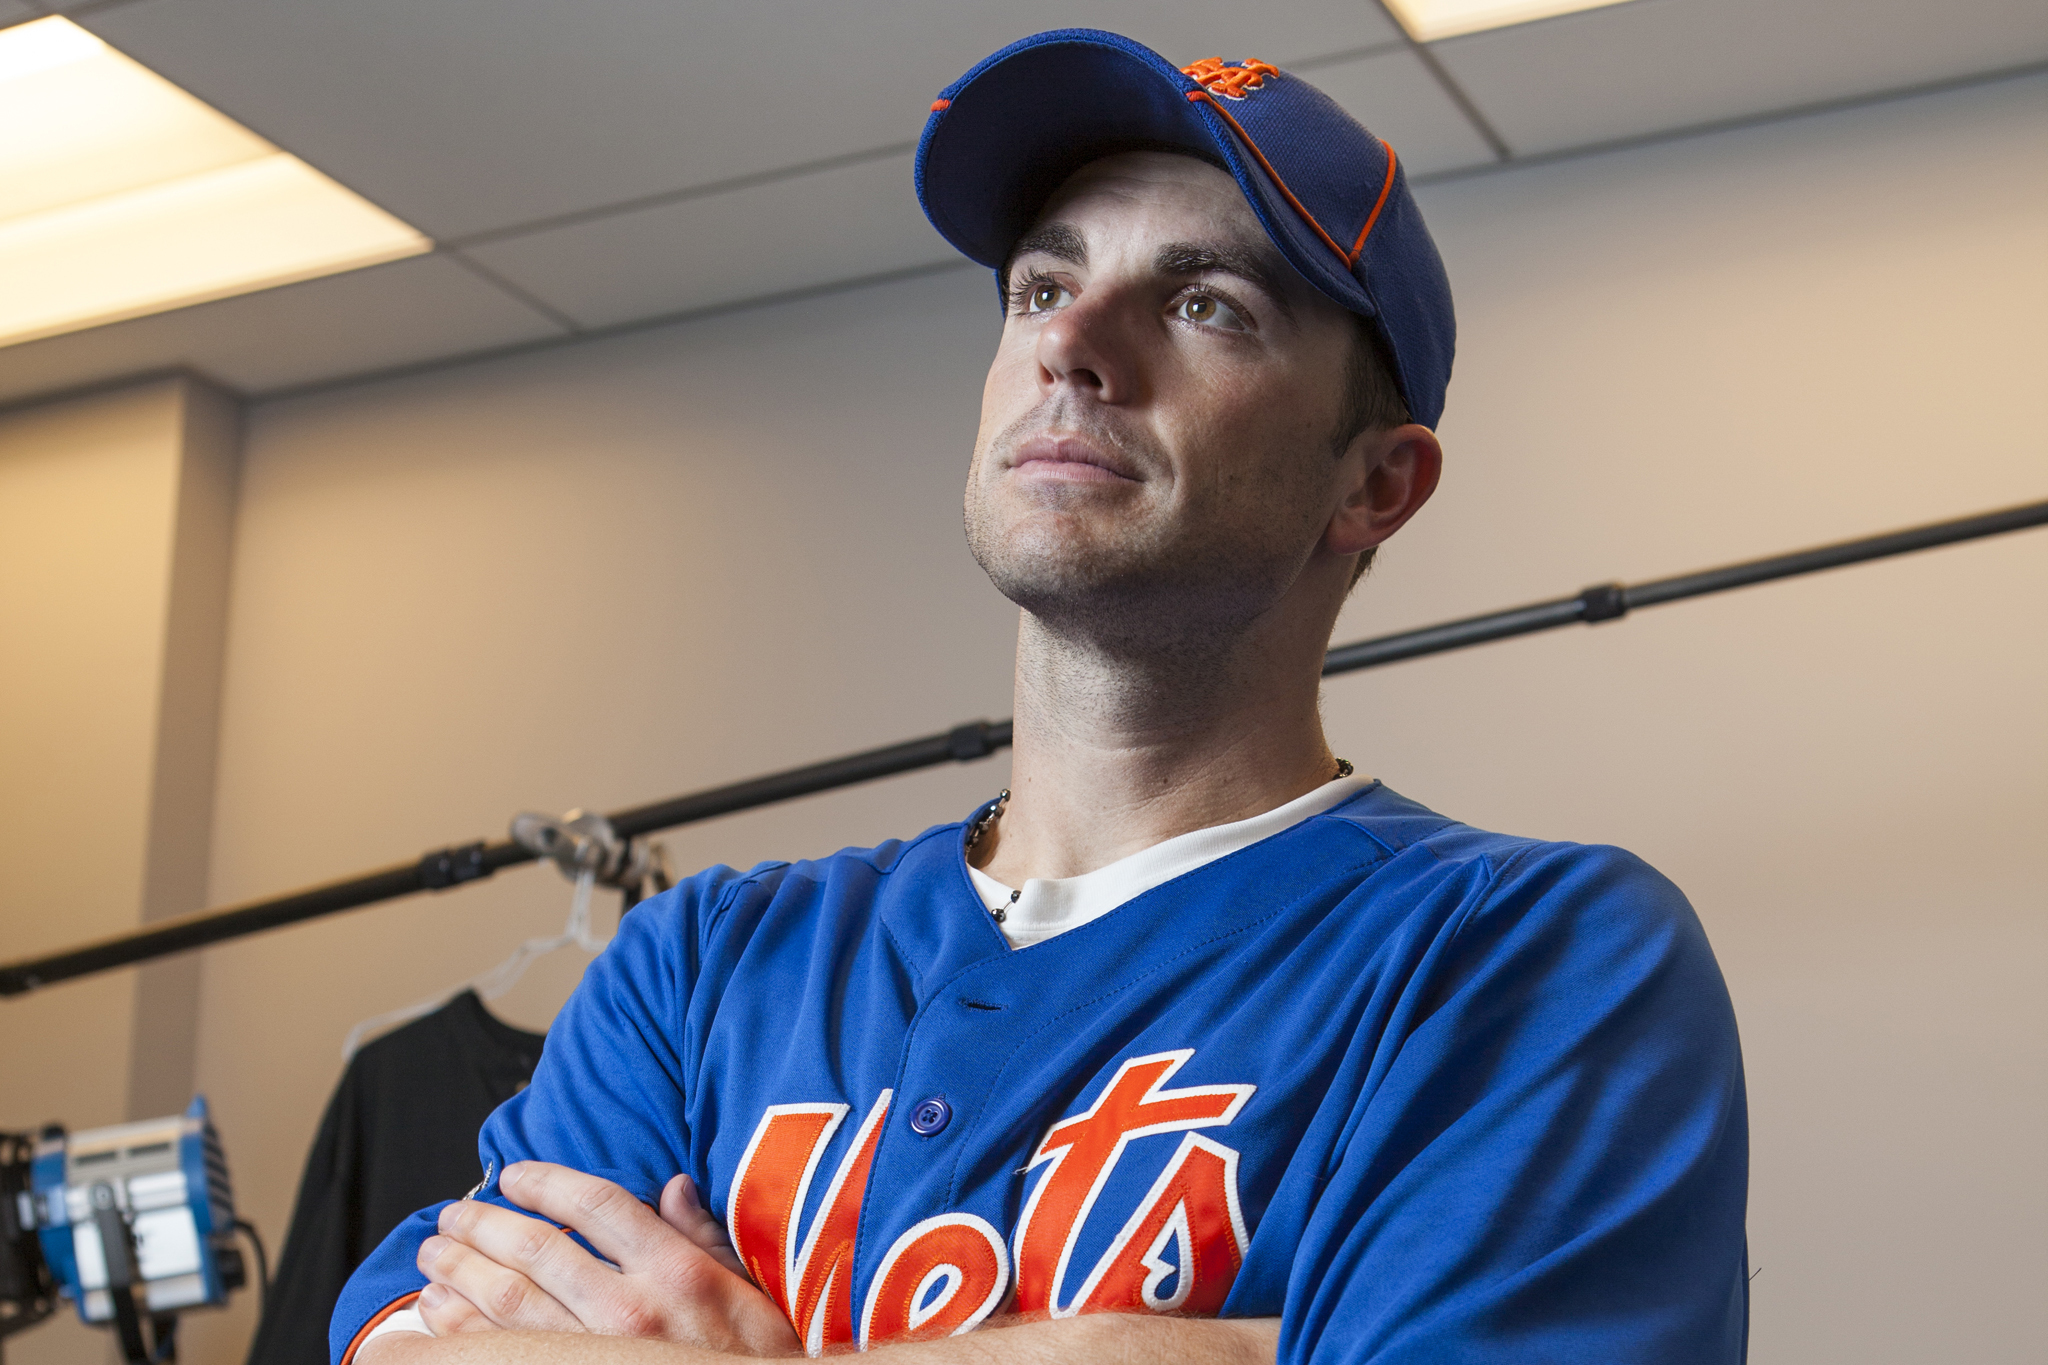 Former Mets' All-Star David Wright on His Relationship with Tom